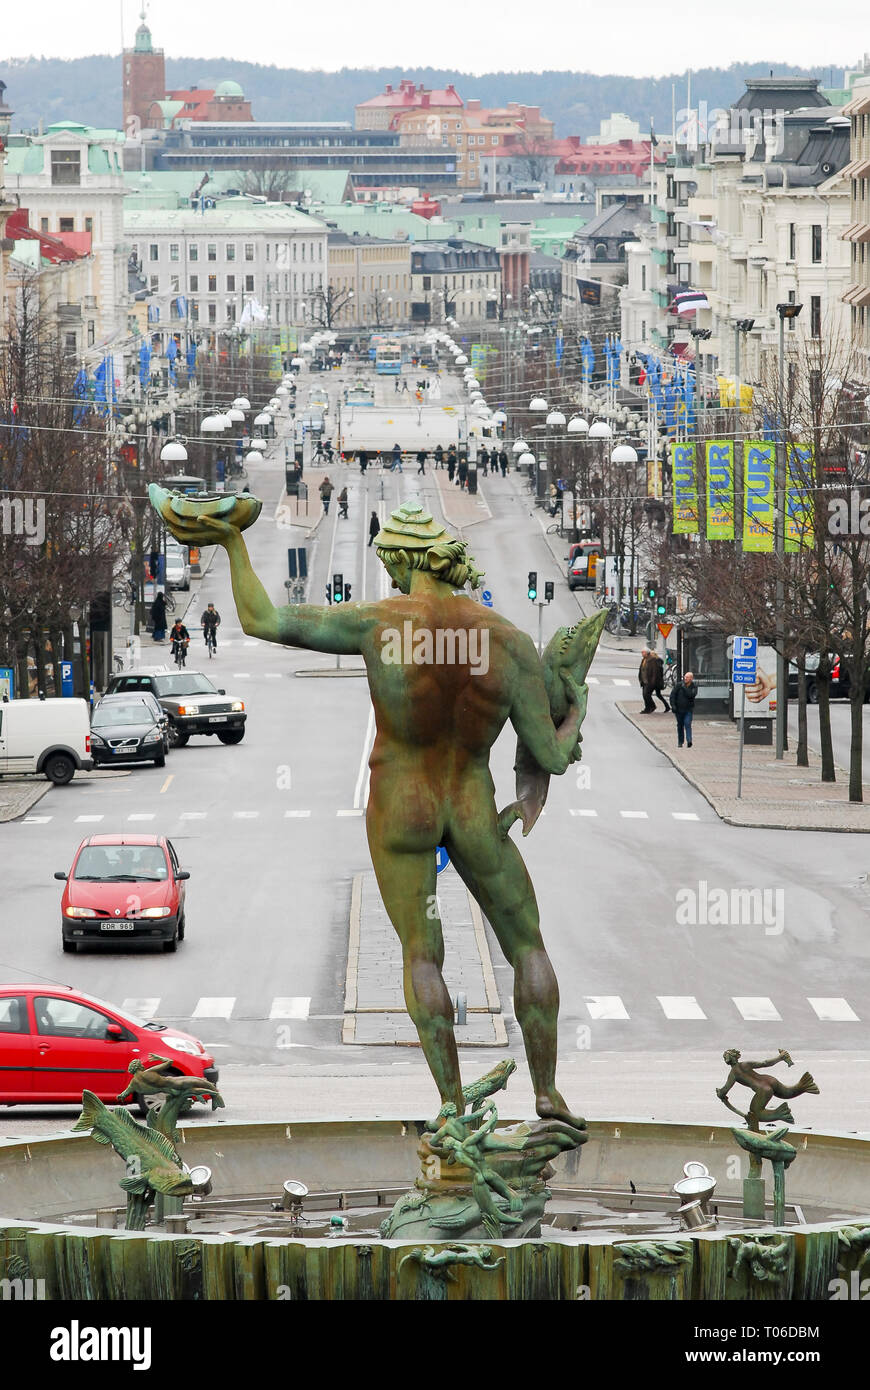 Poseidon statue by Carl Milles on Götaplatsen and Kungsportsavenyen viewed  from the steps of the Gothenburg Museum of Art in Goteborg, Västra Götaland  Stock Photo - Alamy